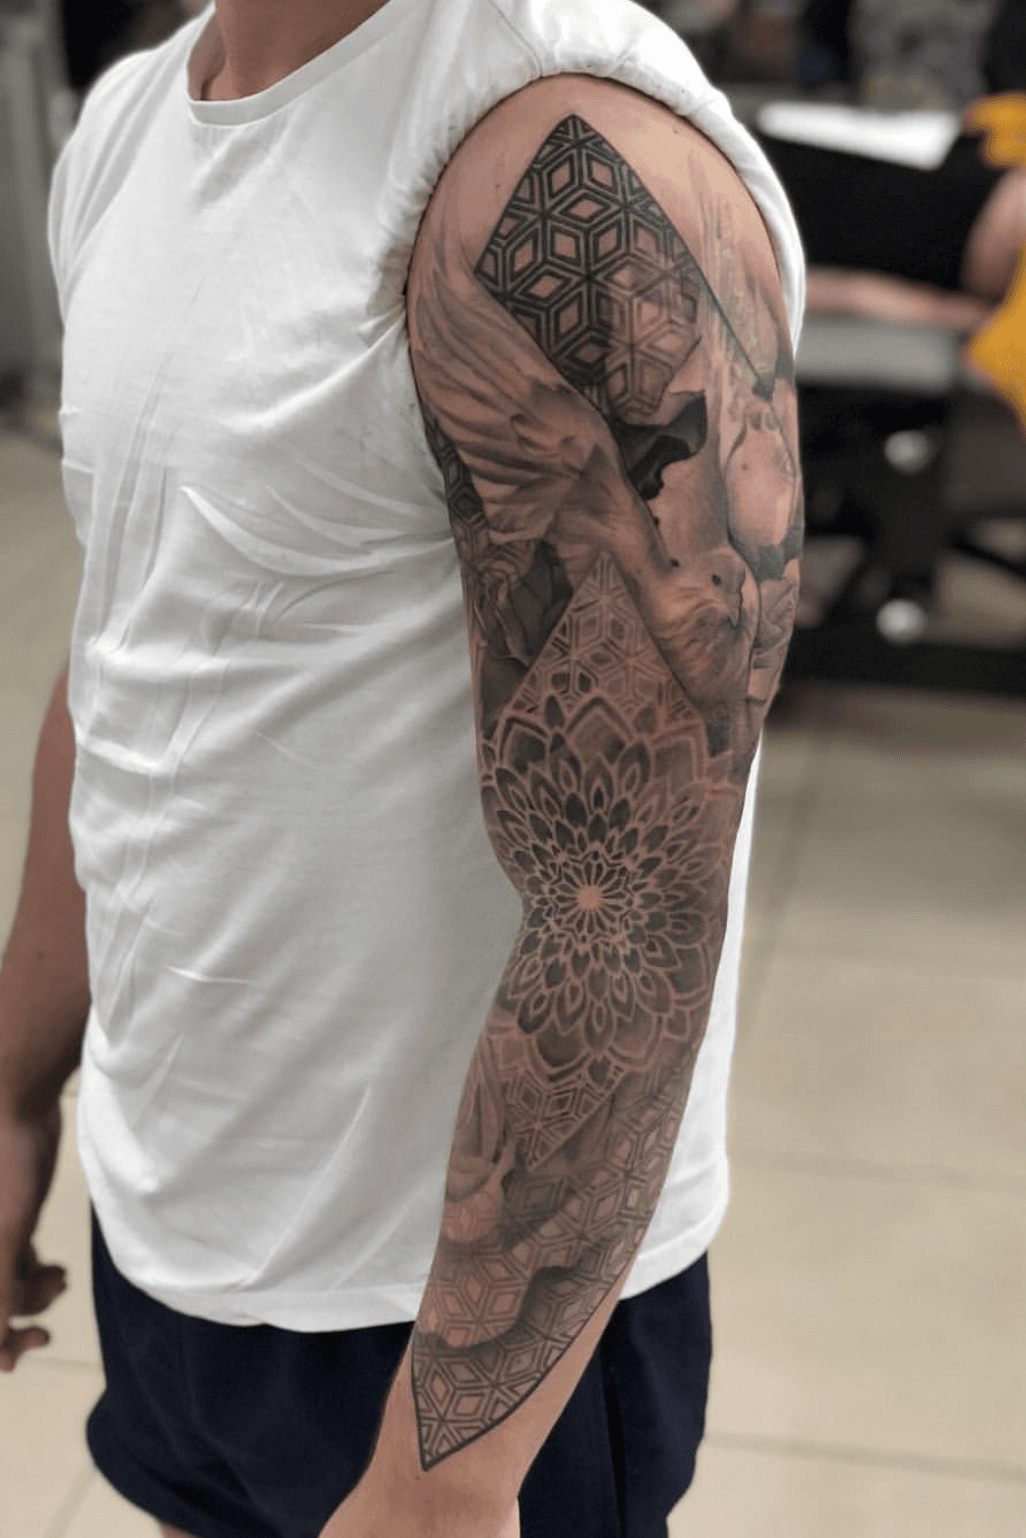 Tattoo uploaded by Mike Philp • Full sleeve based round a gucci print. •  Tattoodo